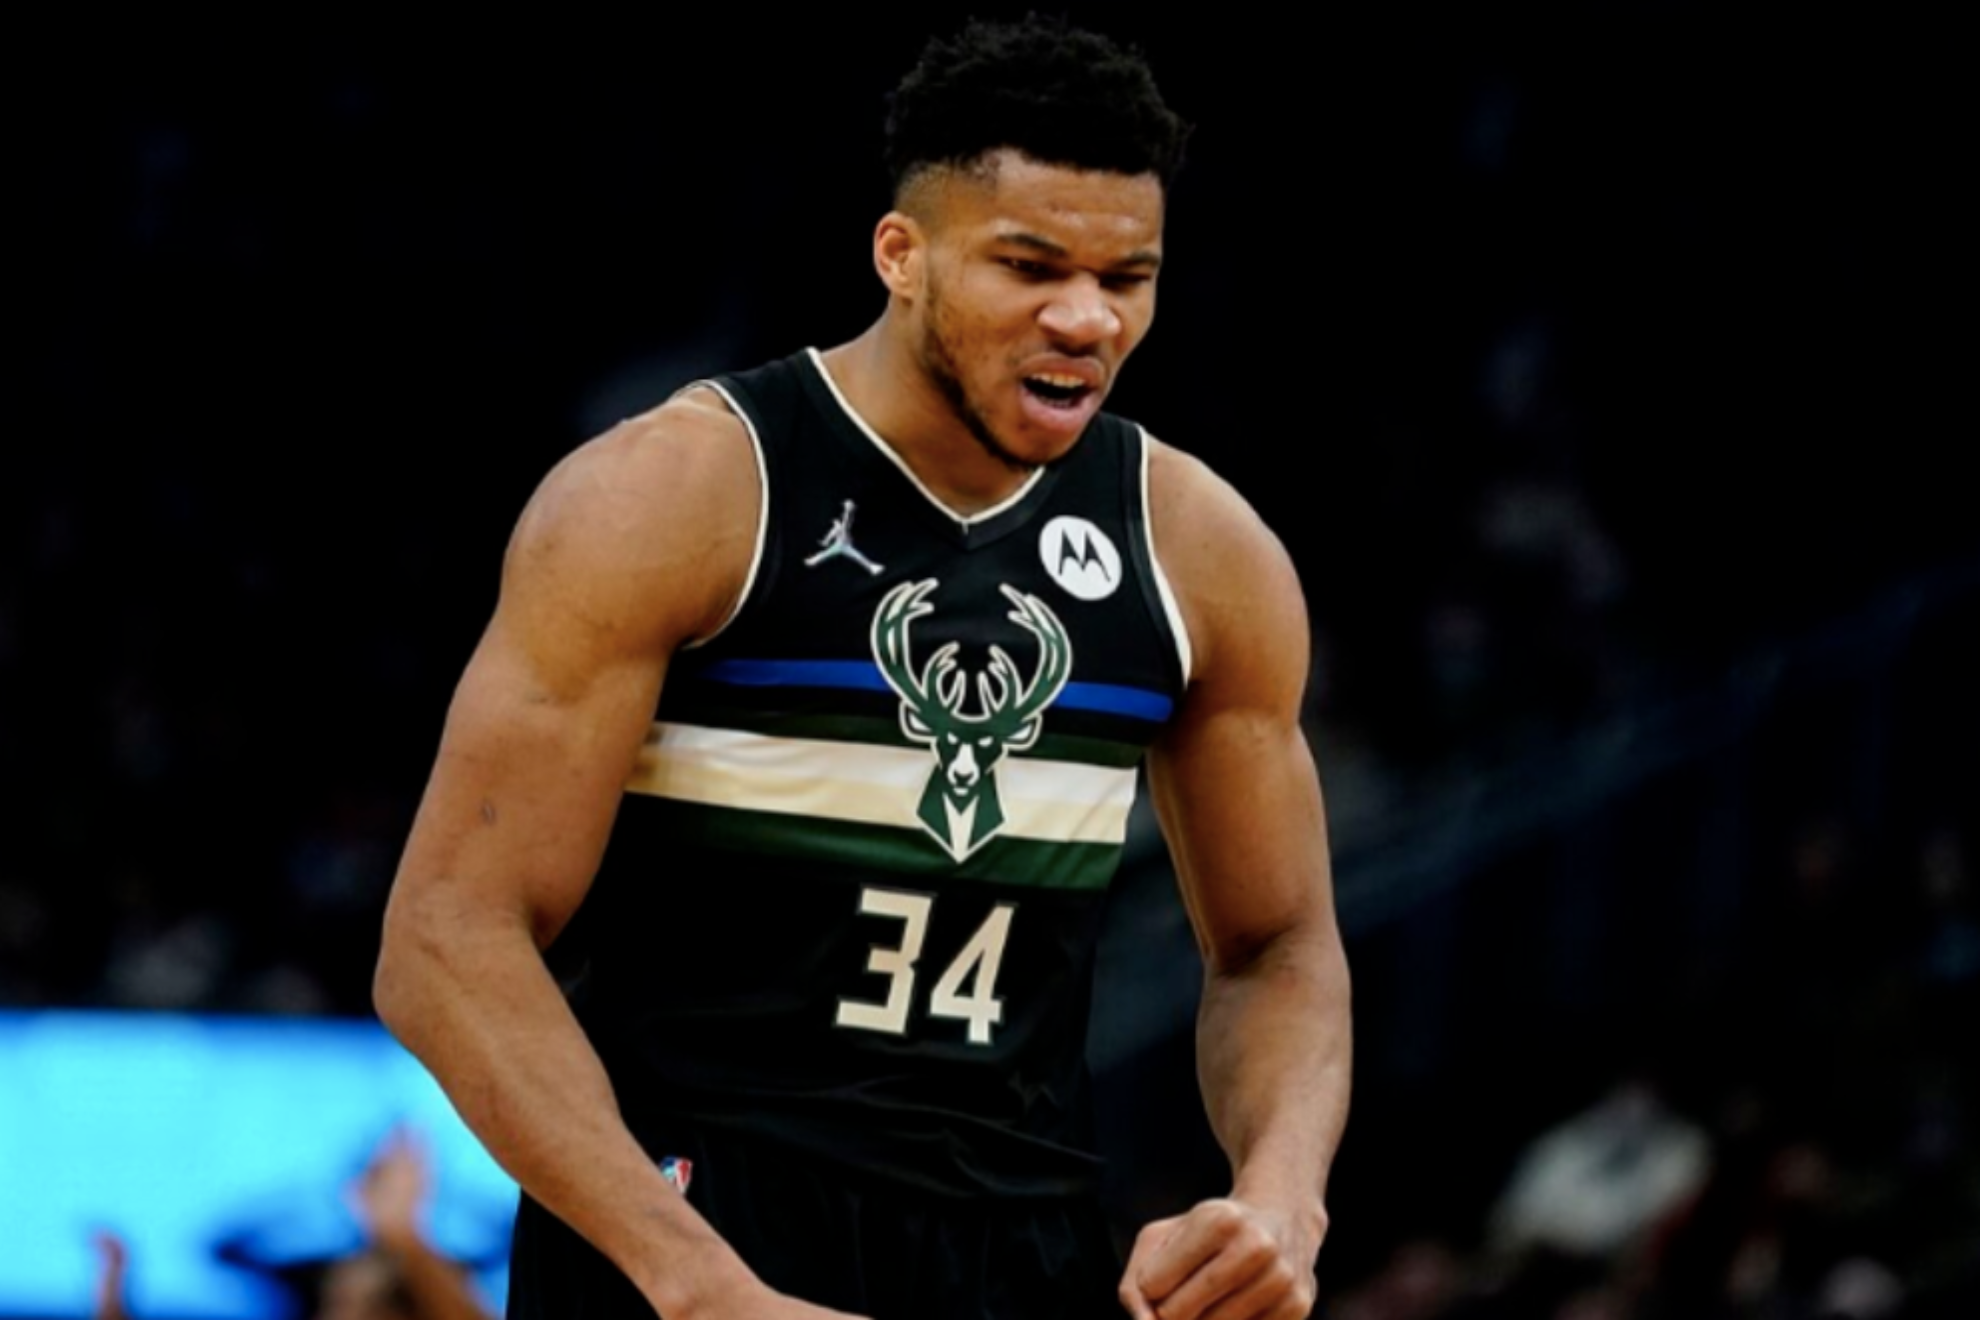 The five teams where Giannis Antetokounmpo could end up after potential trade